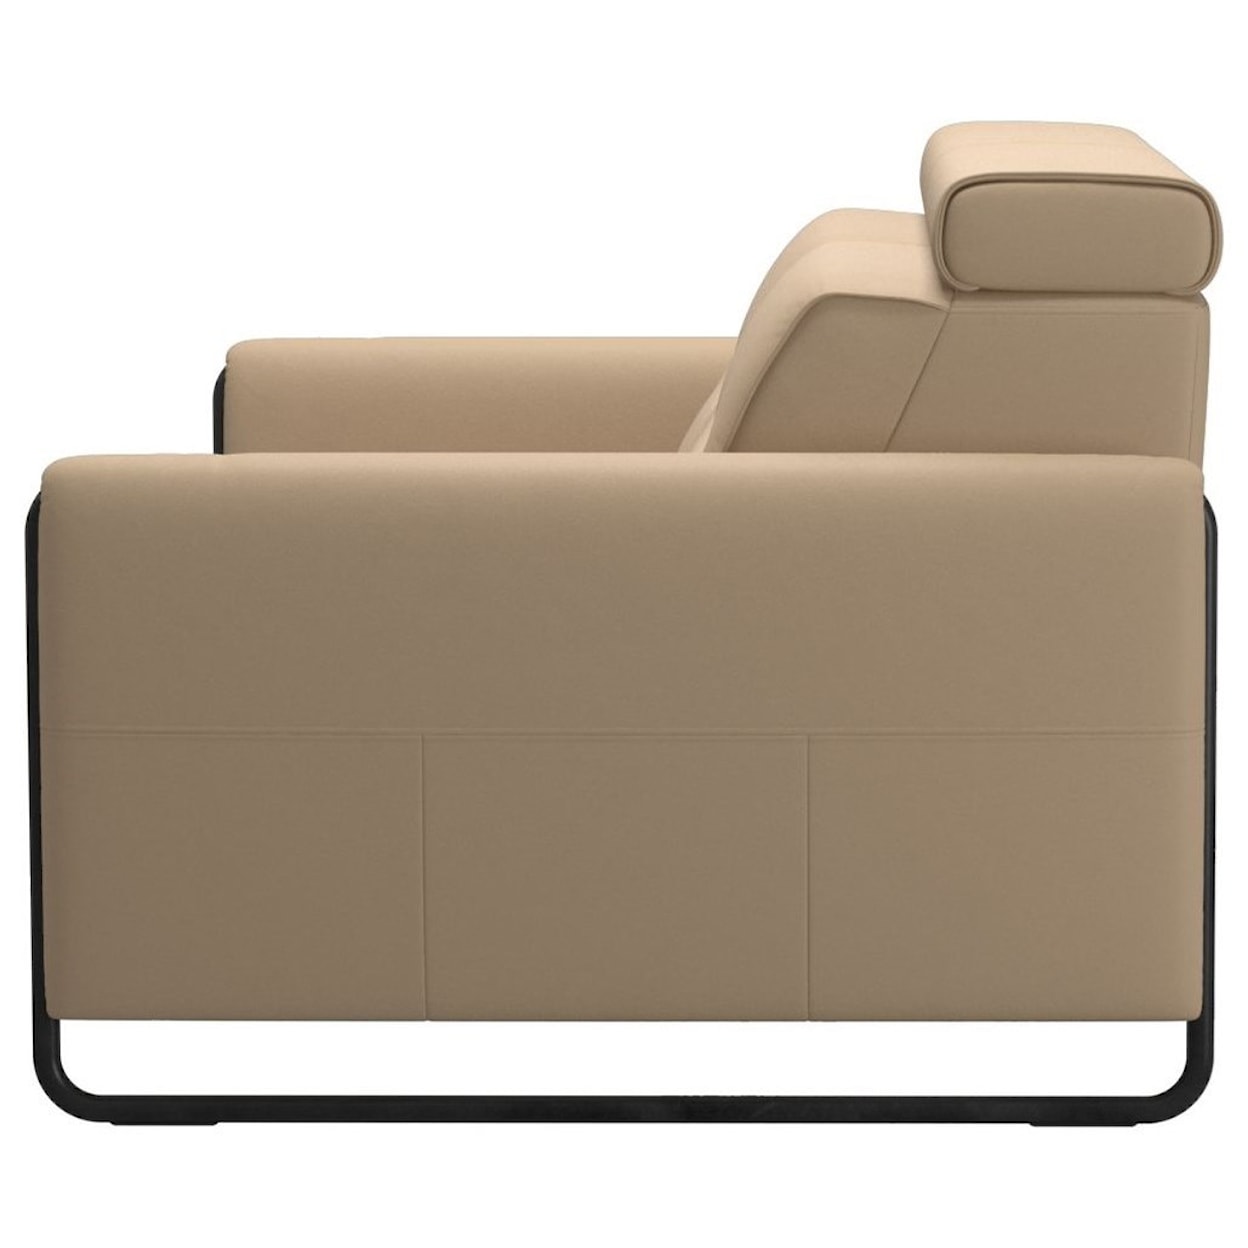 Stressless by Ekornes Emily Power 2-Seat Sofa with Steel Arms